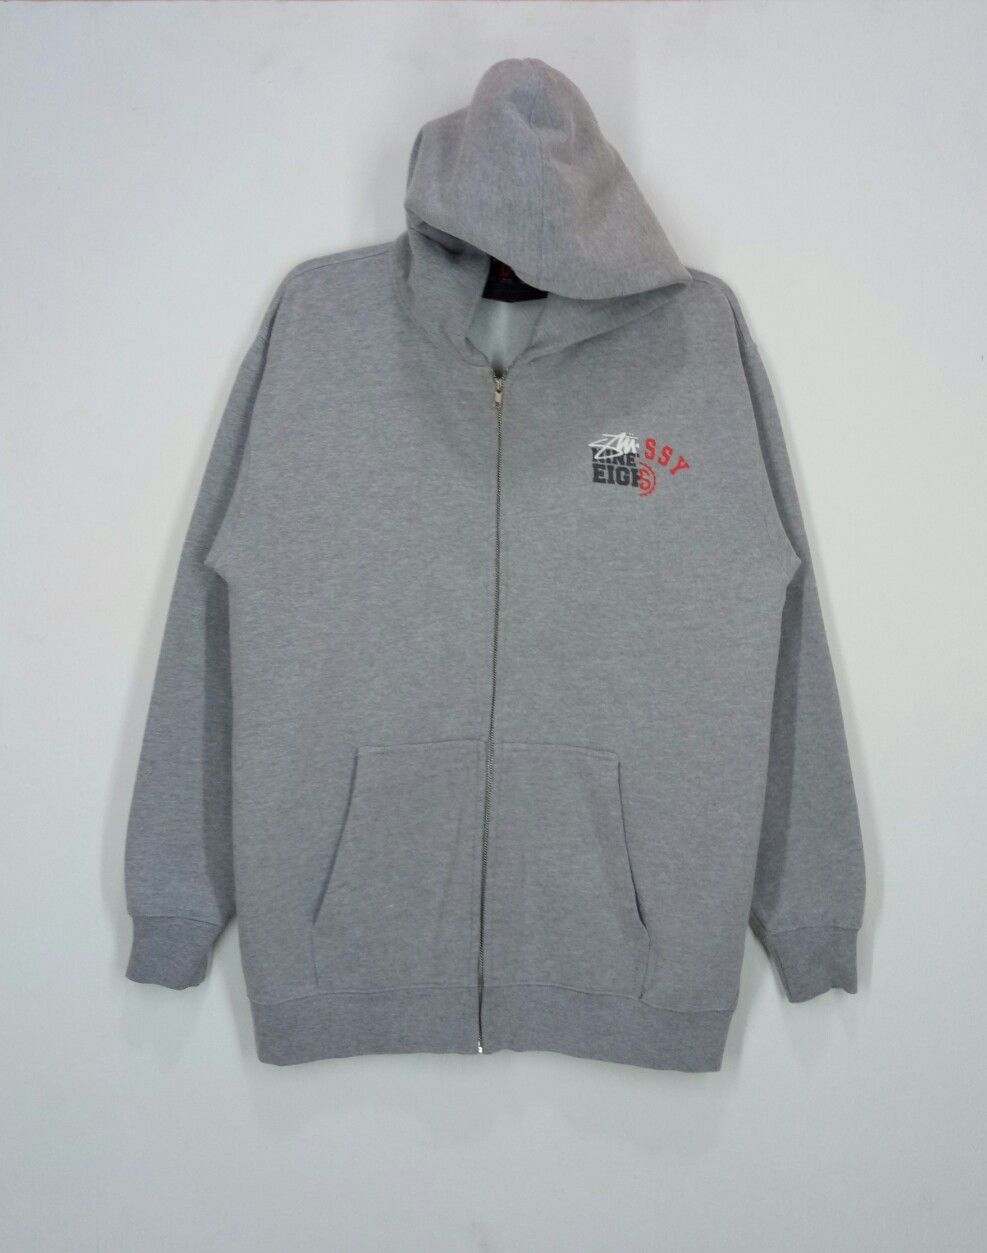 Stussy Rare!! STUSSY hoodies large size Size US L / EU 52-54 / 3 - 1 Preview